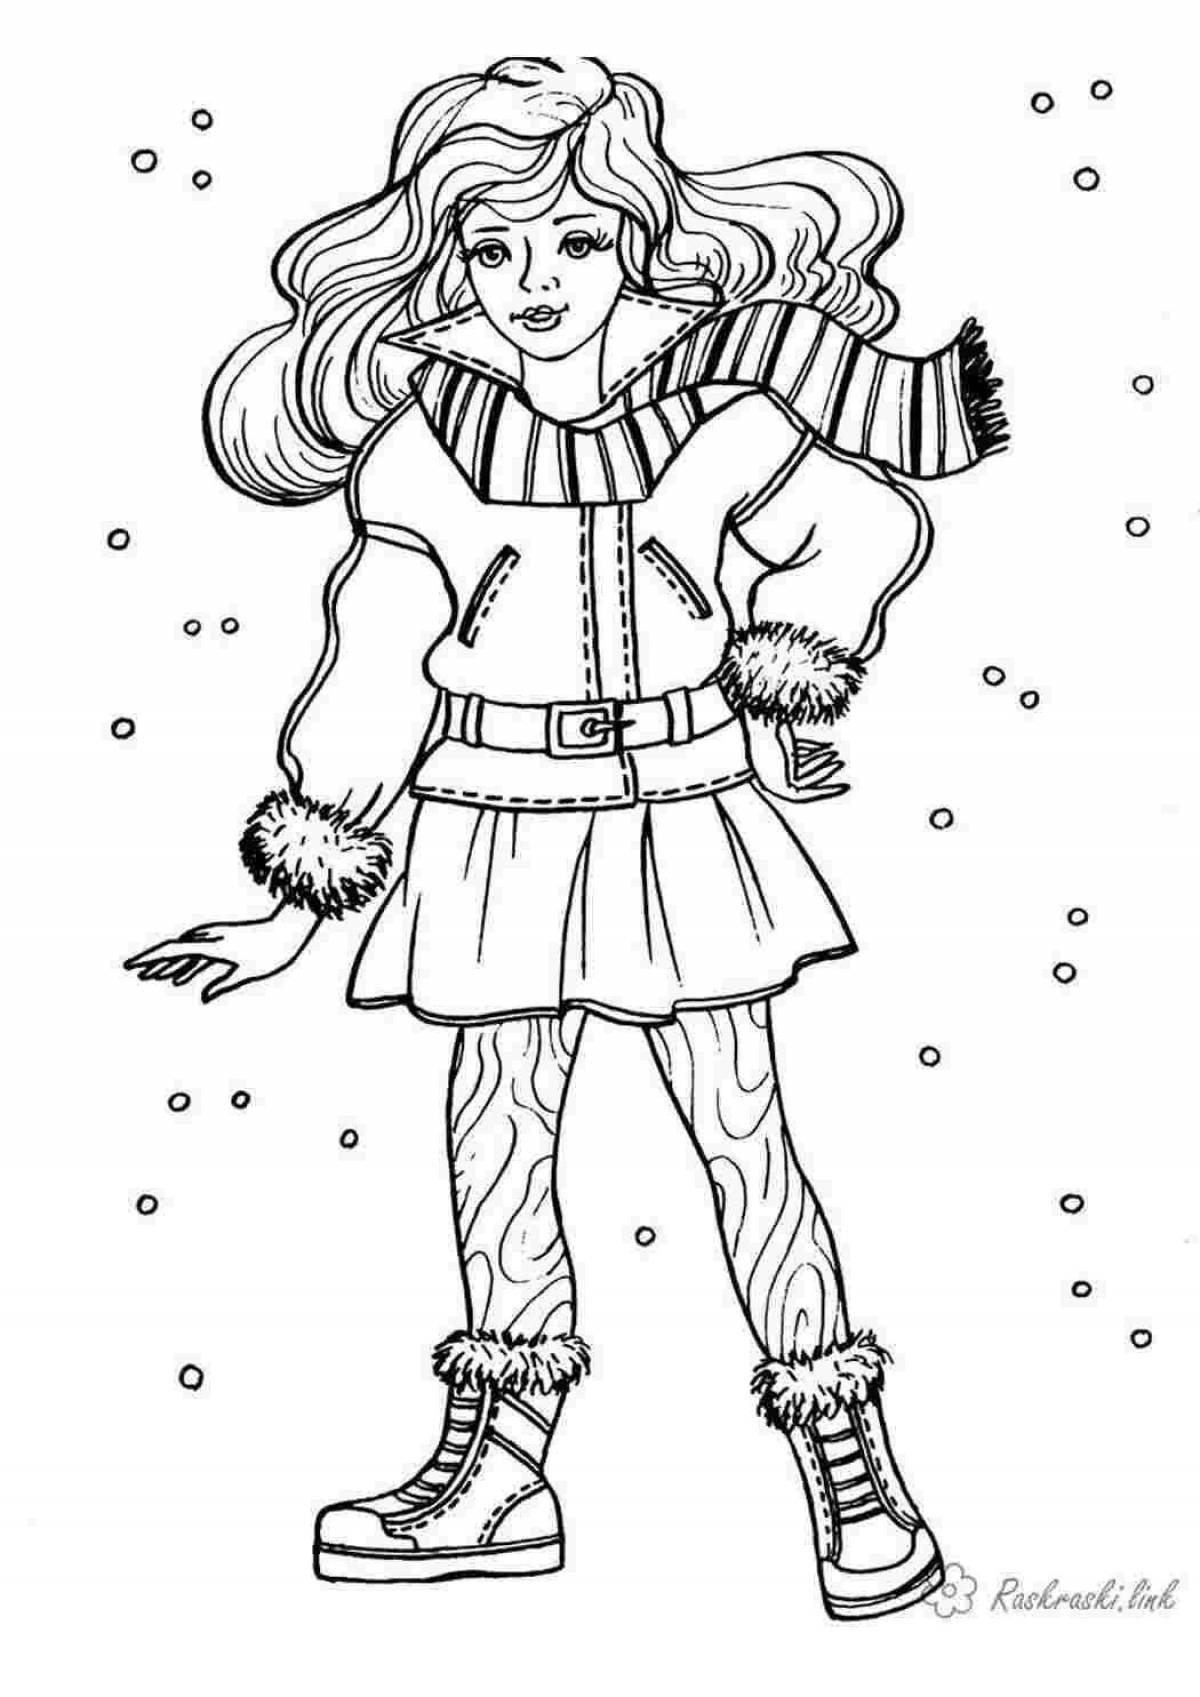 Sparkly coloring doll in winter clothes